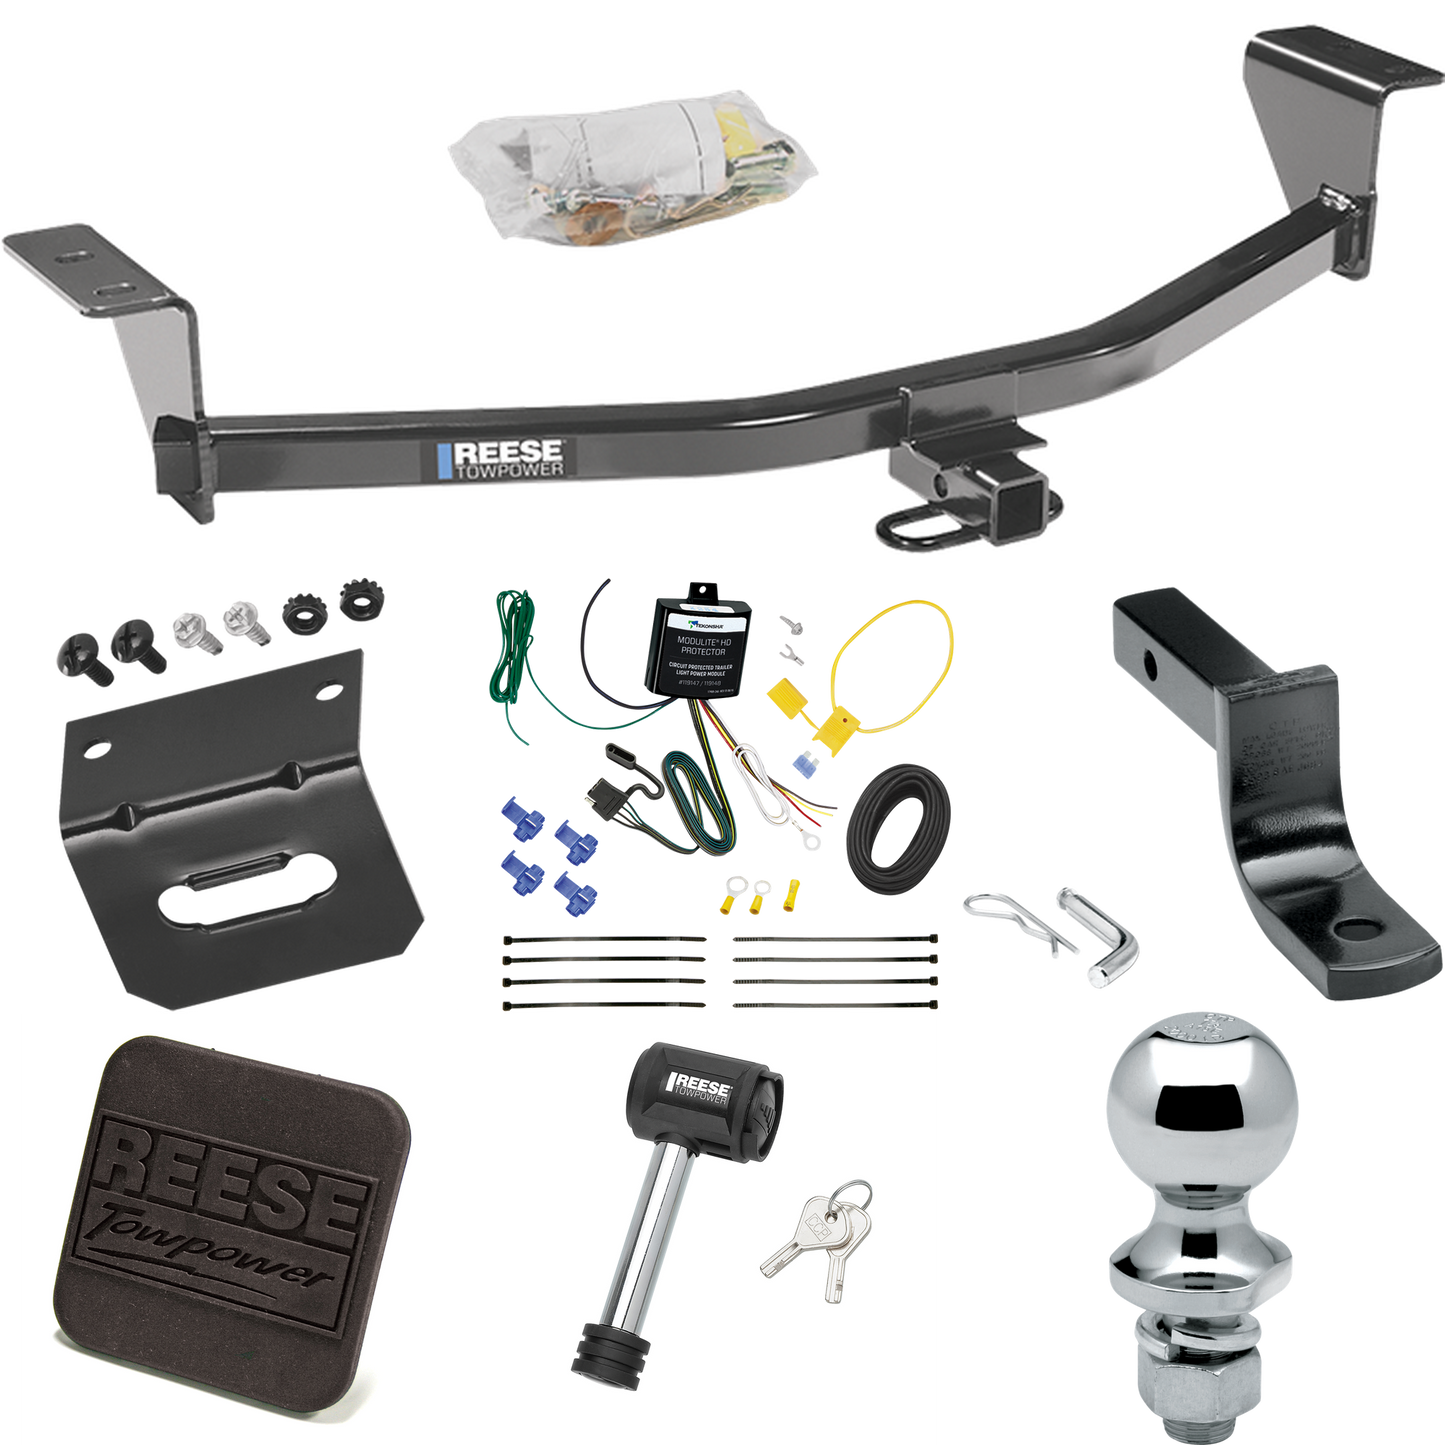 Fits 2008-2010 Scion xB Trailer Hitch Tow PKG w/ 4-Flat Wiring Harness + Draw-Bar + 1-7/8" Ball + Wiring Bracket + Hitch Cover + Hitch Lock (Excludes: Release Series Models) By Reese Towpower